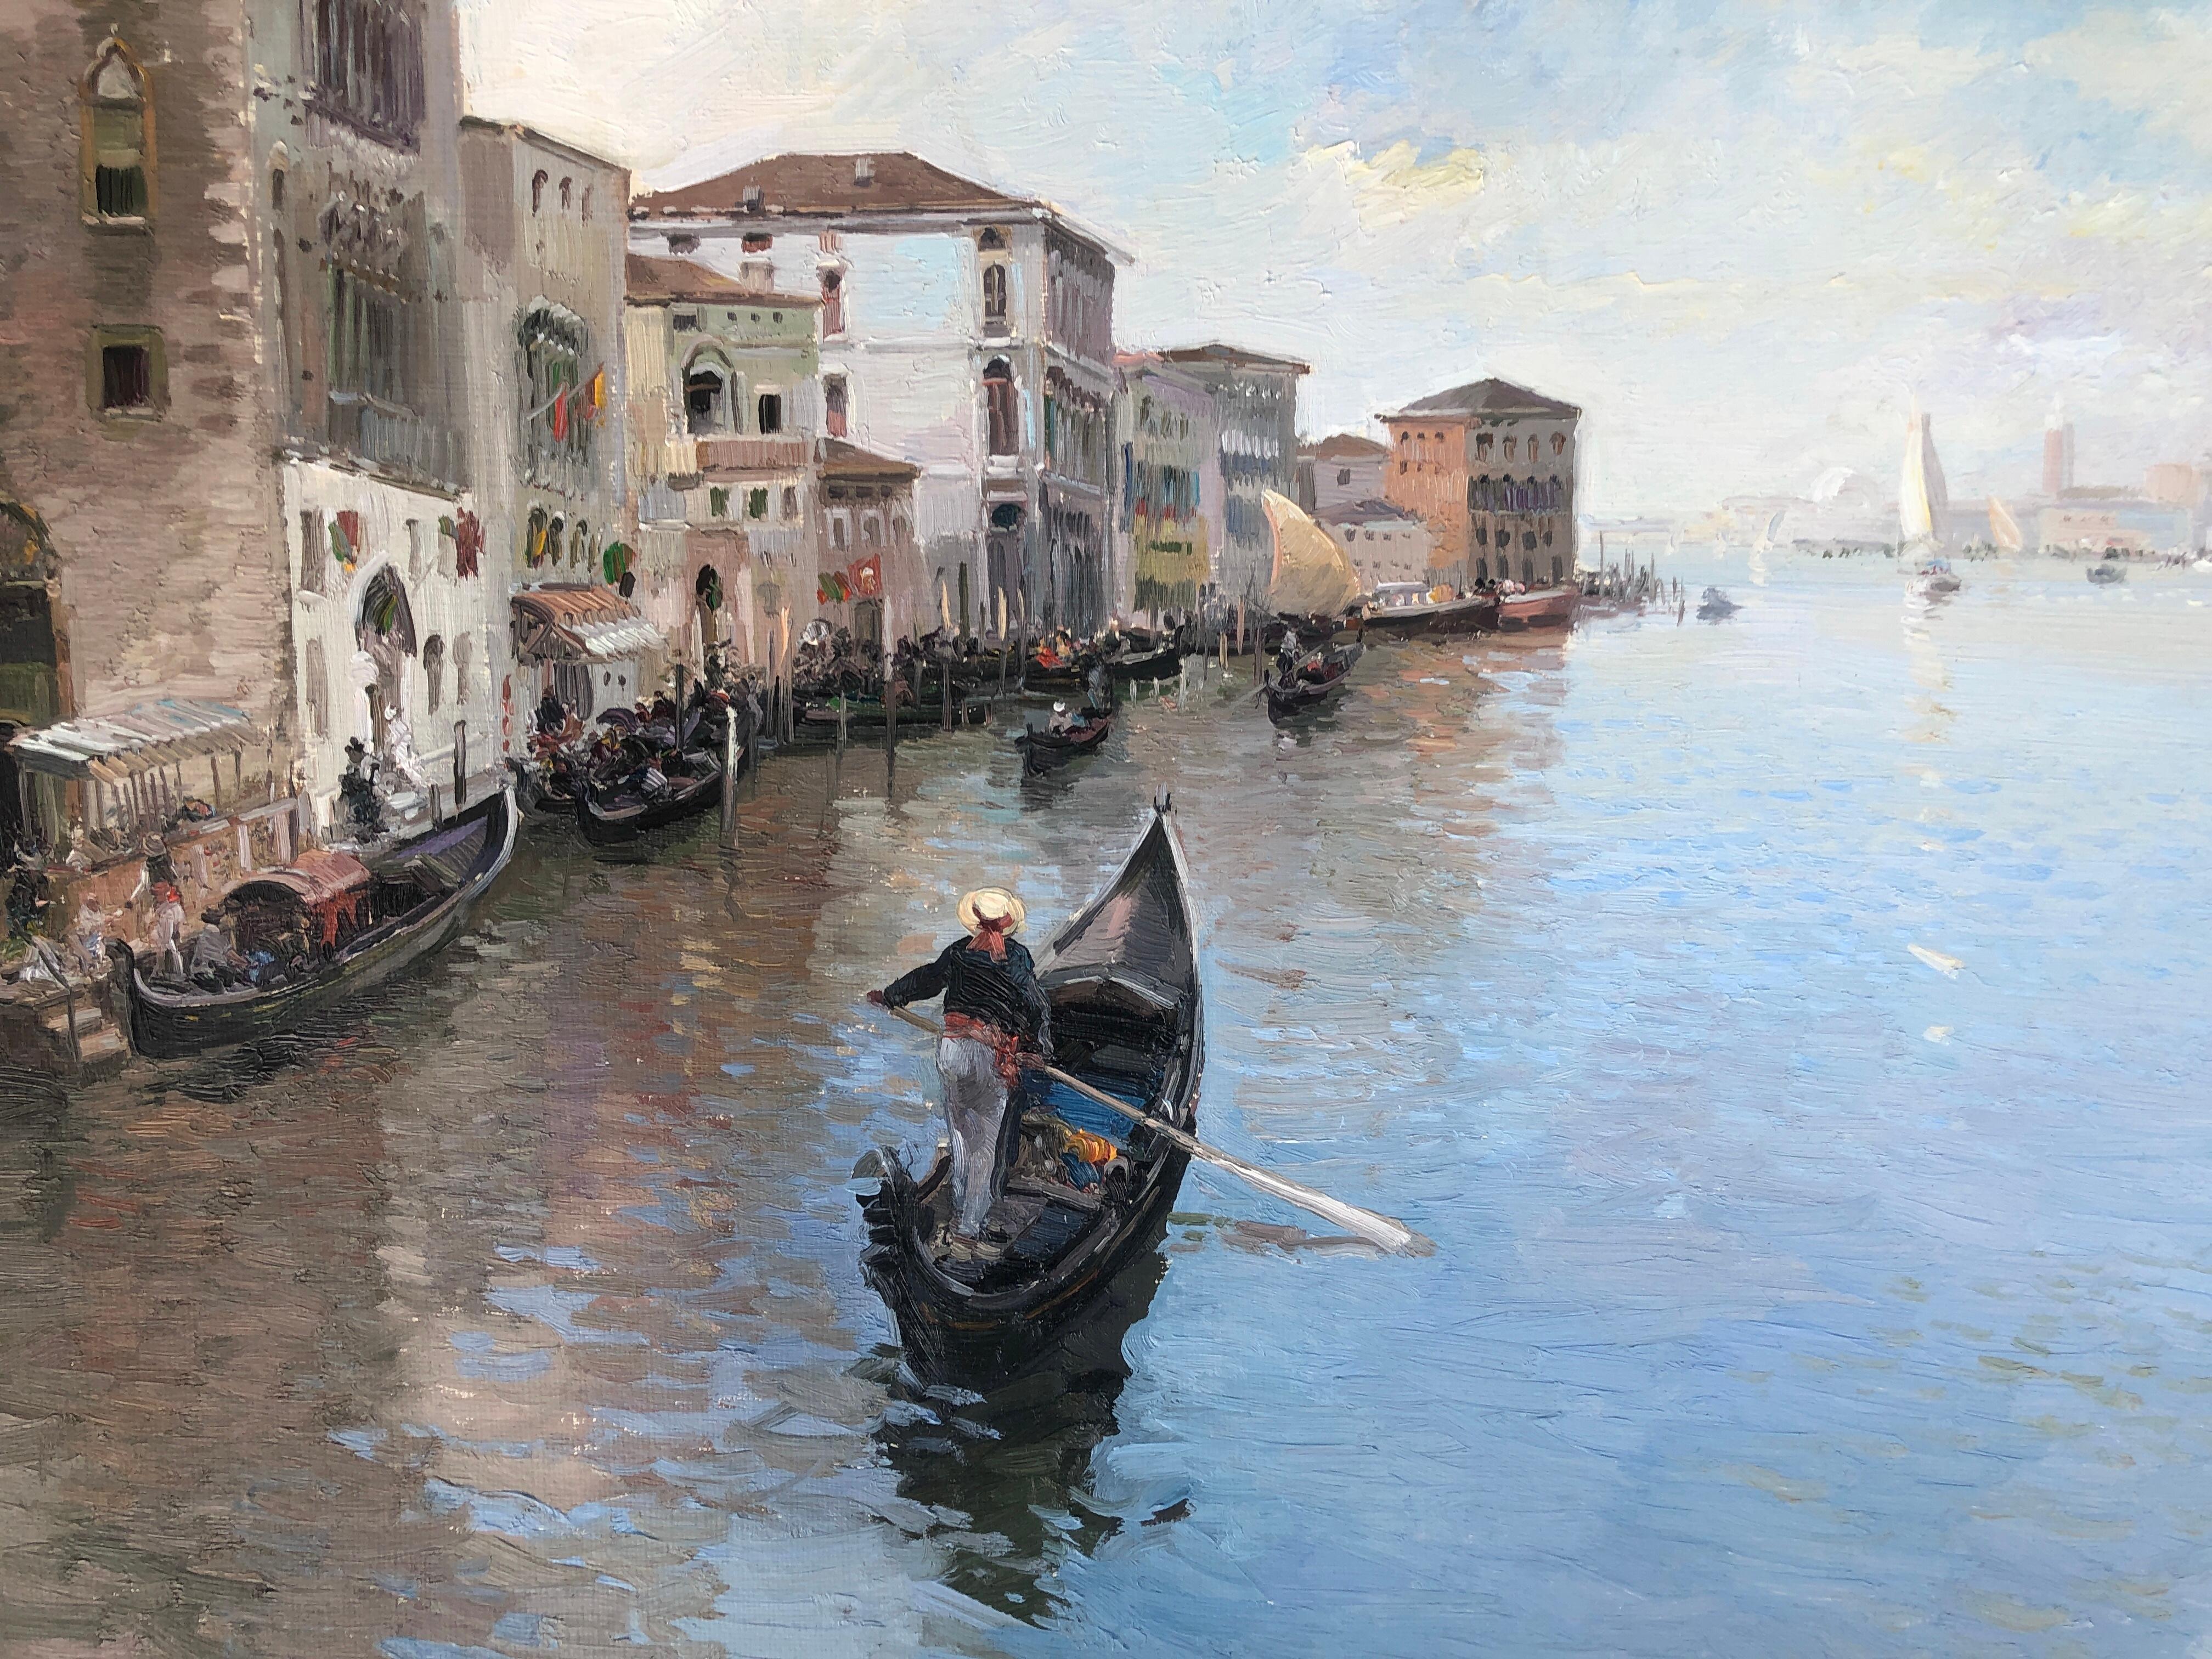 Venice Italy seascape original oil on canvas painting - Gray Landscape Painting by José Luis Checa